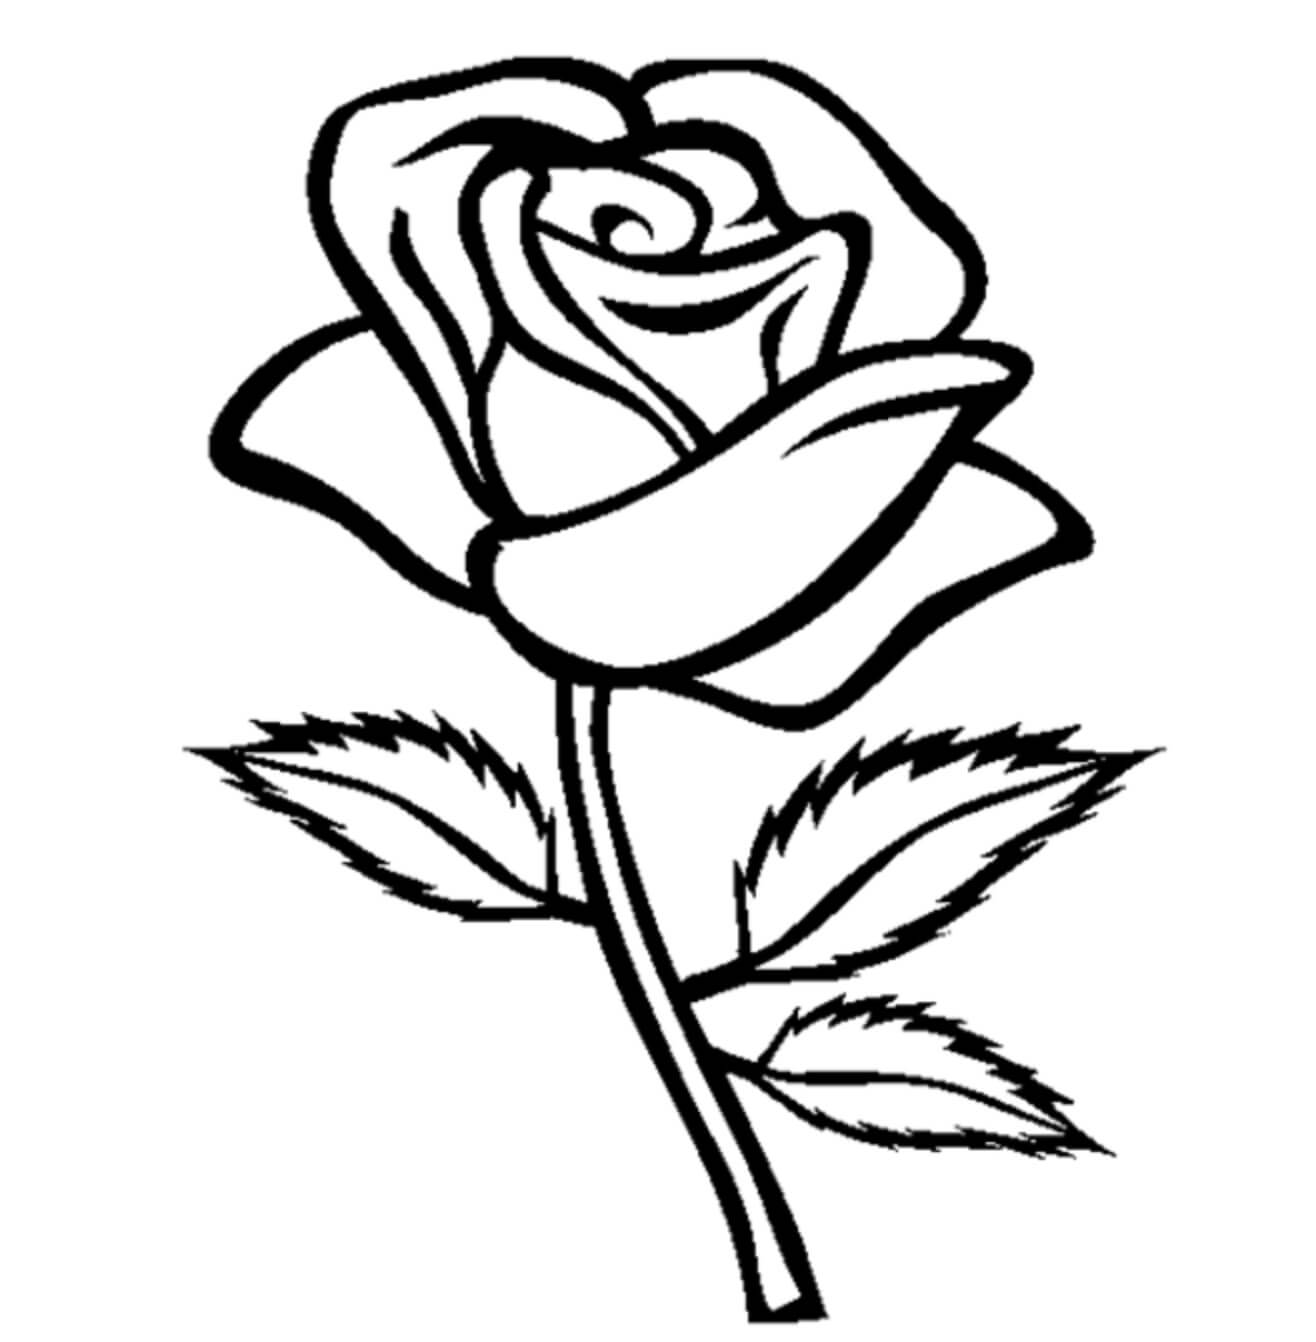 Jolie Rose coloring page